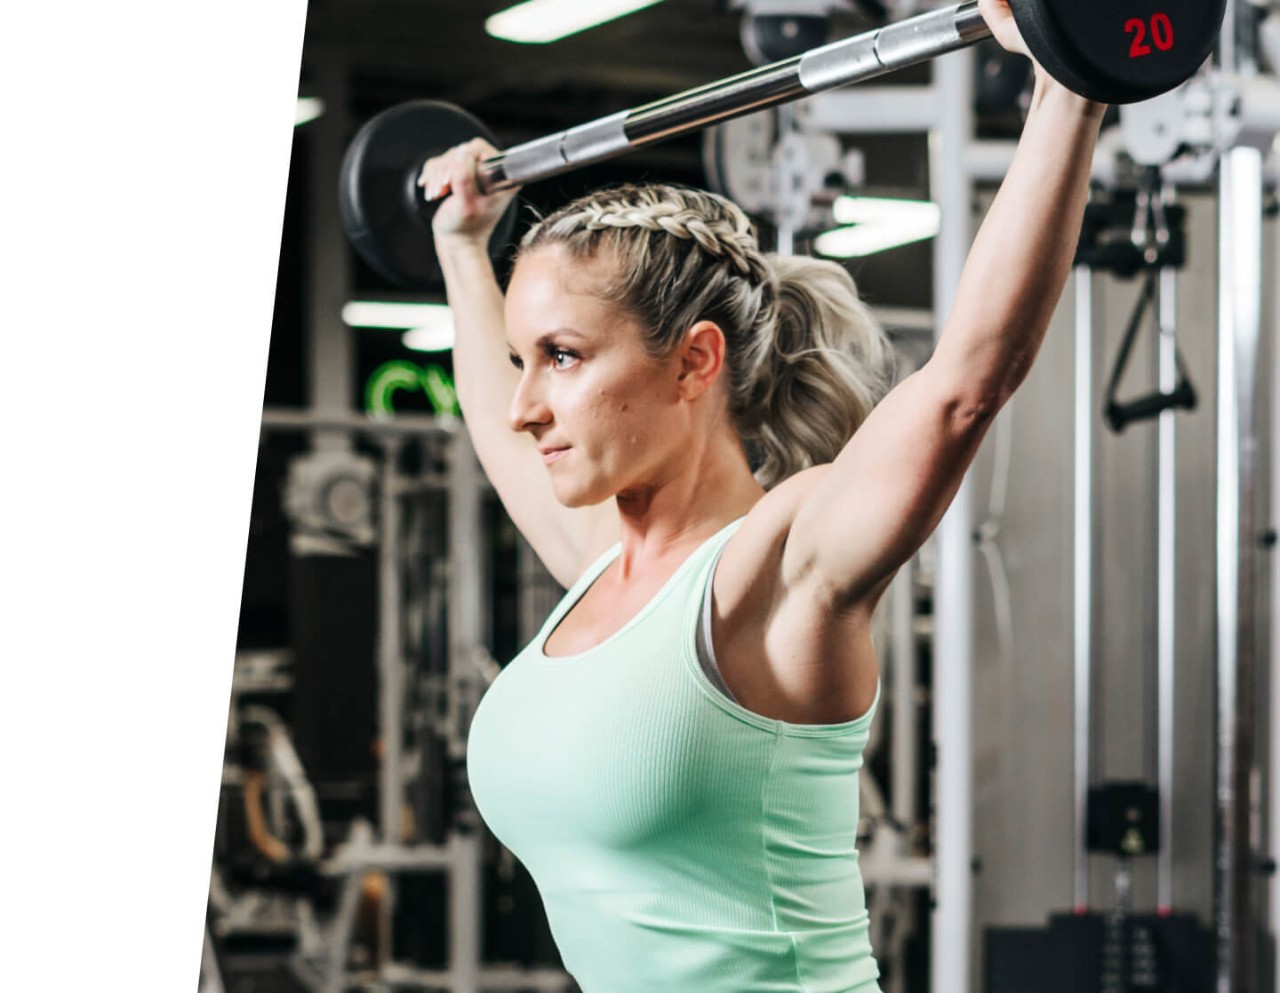 Woman in mint green tank top doing a barbell squat in weight area